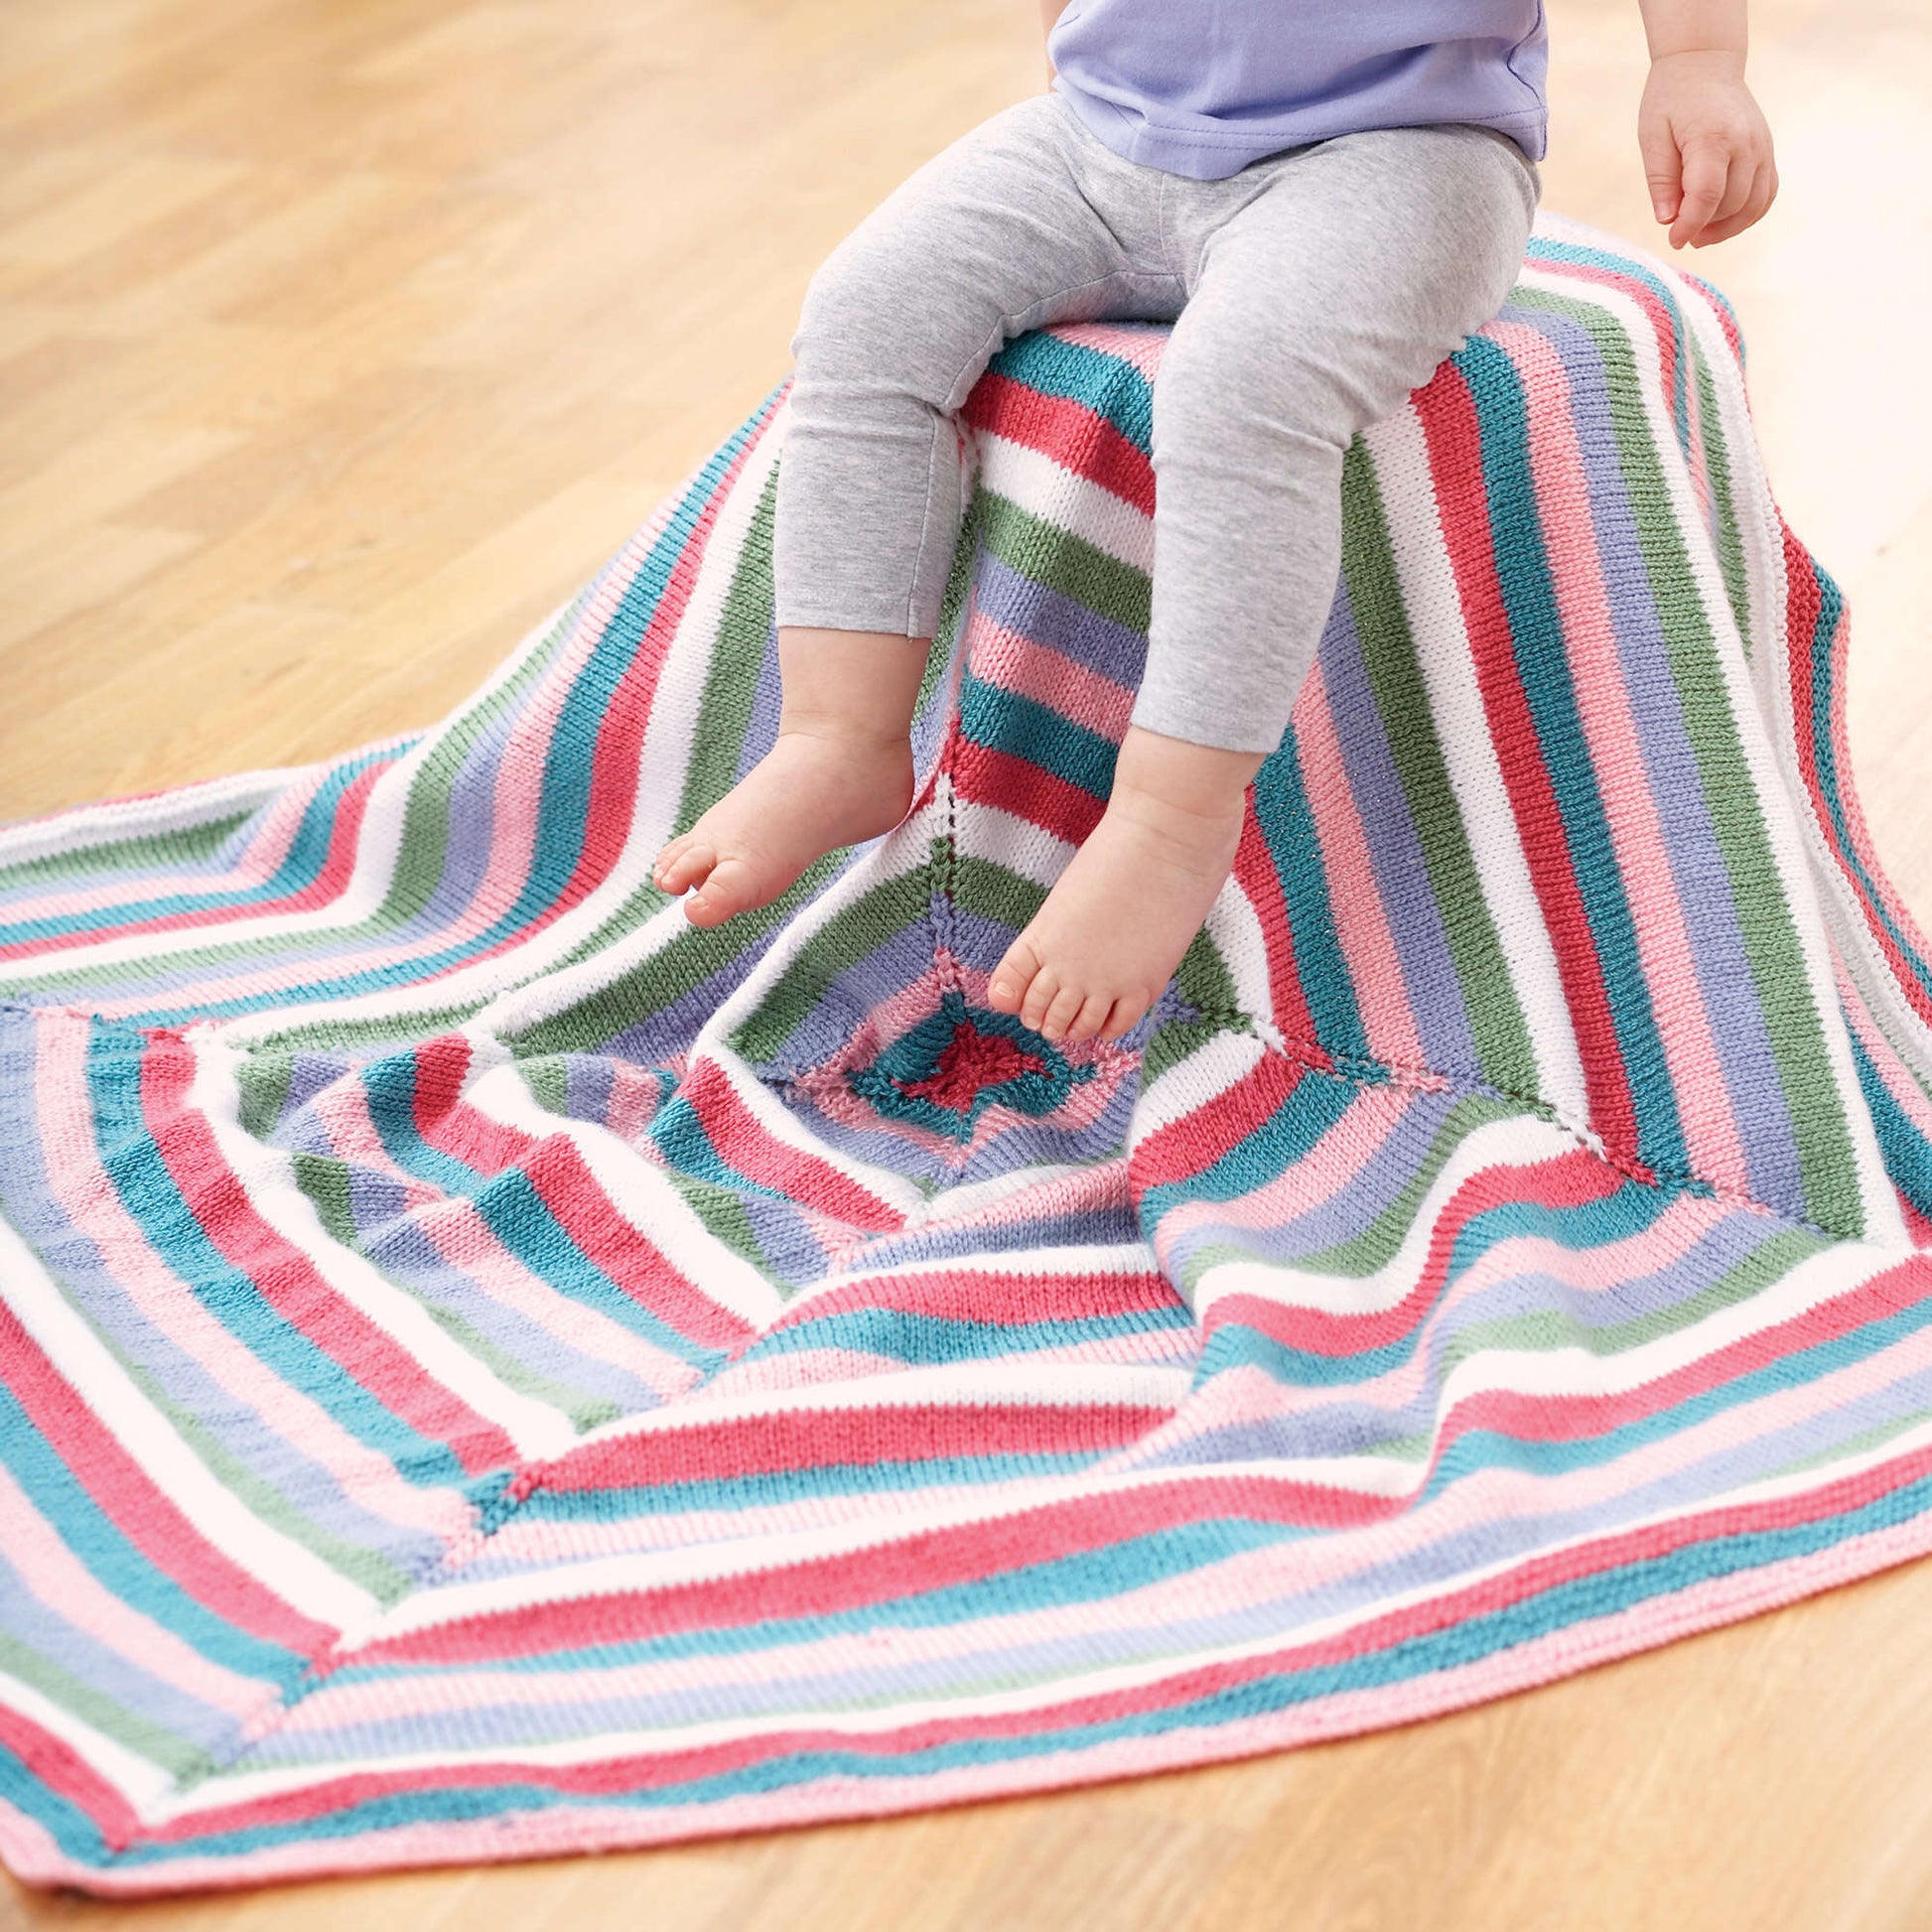 Free Bernat From The Middle Knit Blanket Pattern